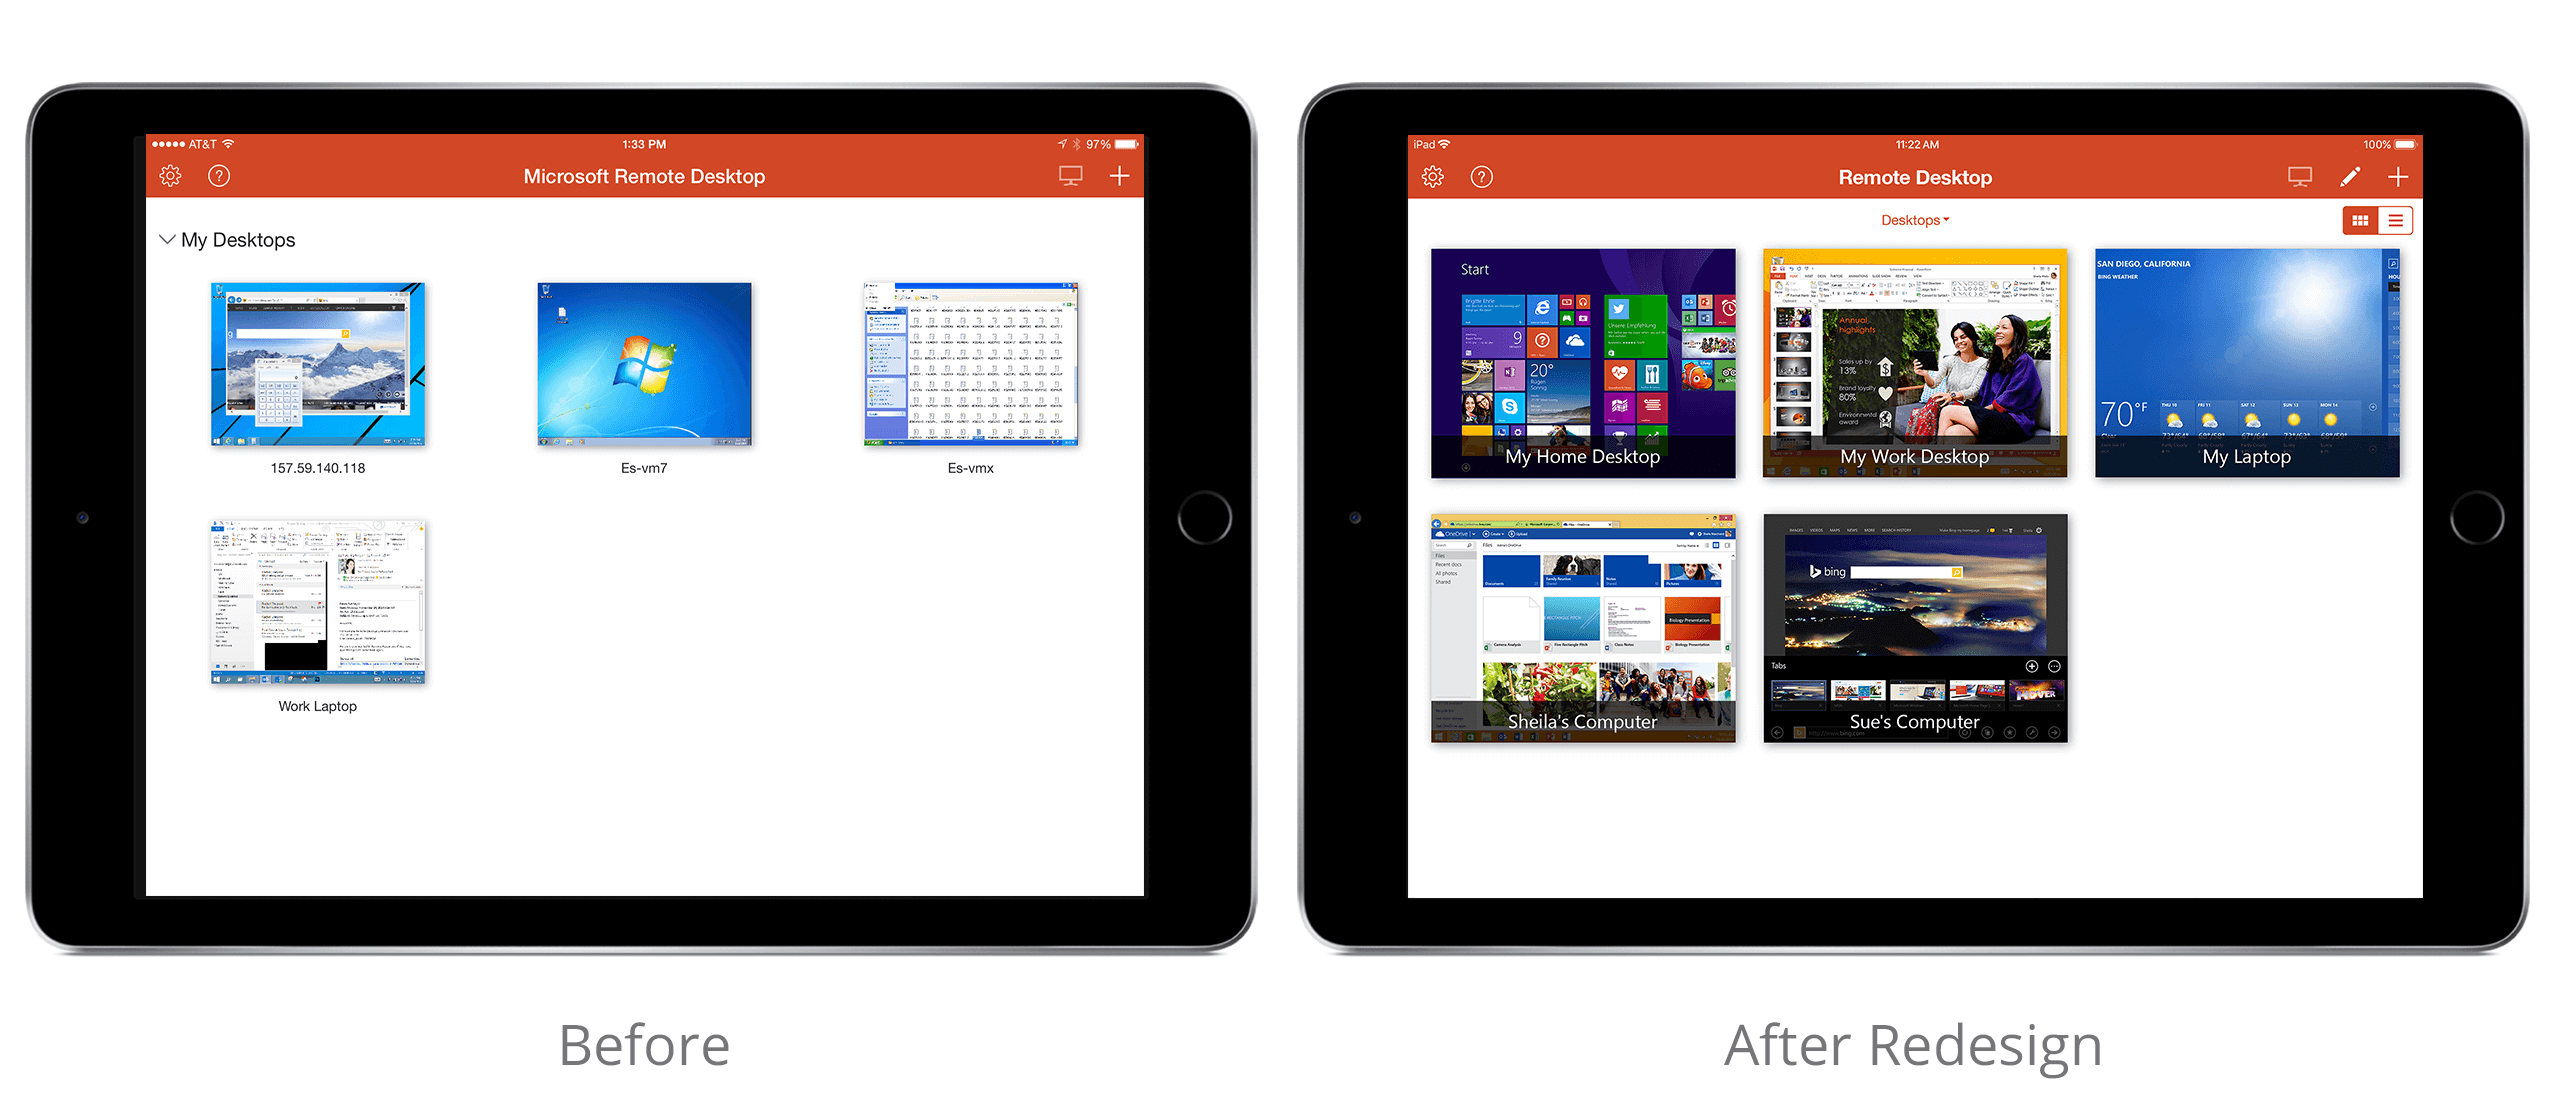 Side by side comparison of Remote Desktop iPad app before and after redesign. Shows the main screen of the app with recently added PCs, shown on iPad devices.